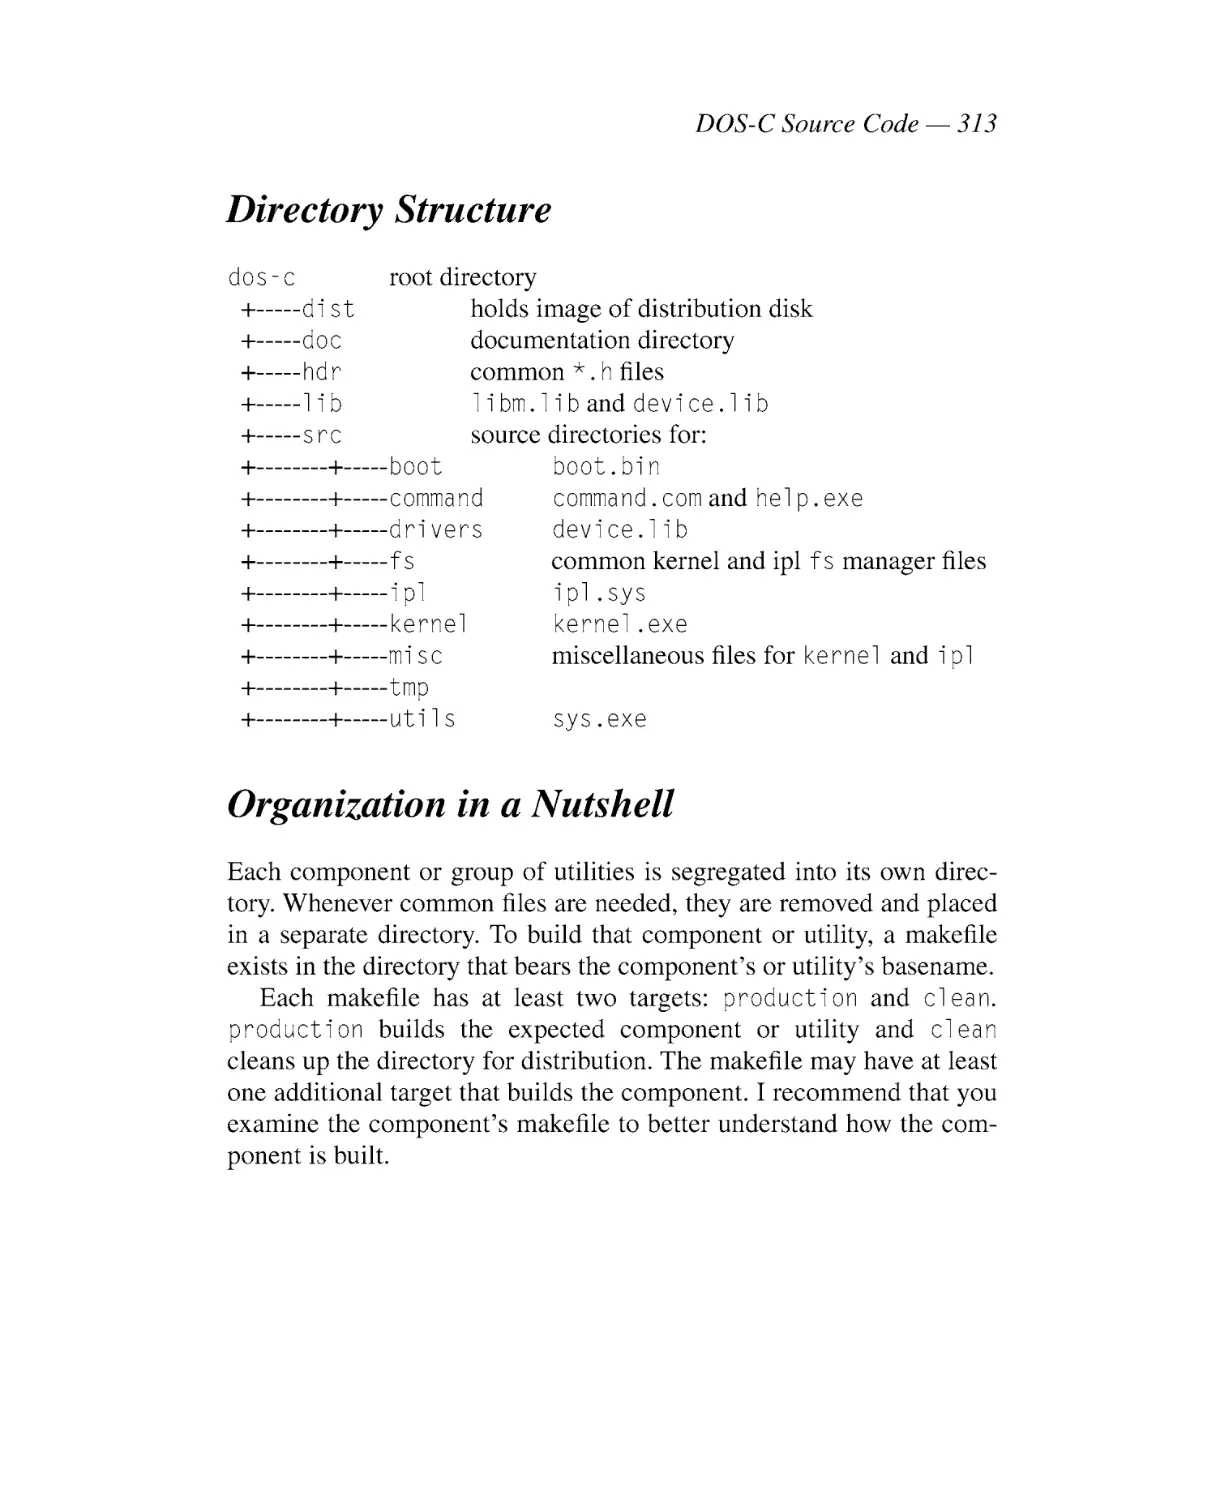 Organization in a Nutshell
Directory Structure